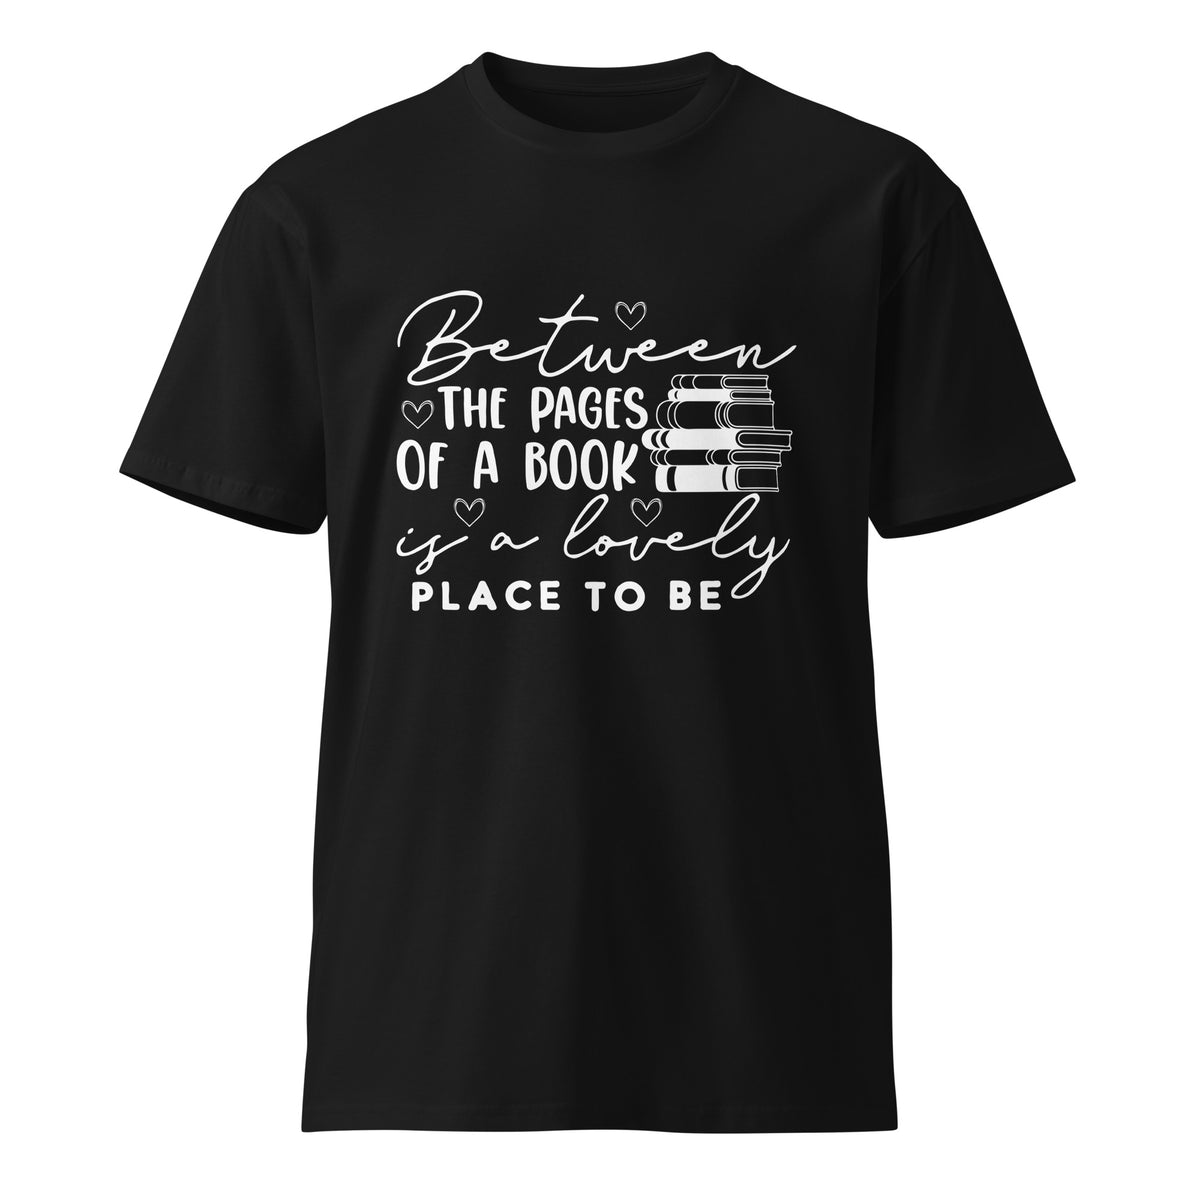 Between the Pages - Literary Inspiration Unisex Tee - Black - Comfortable Men's Tees Comfortable Women's Tees